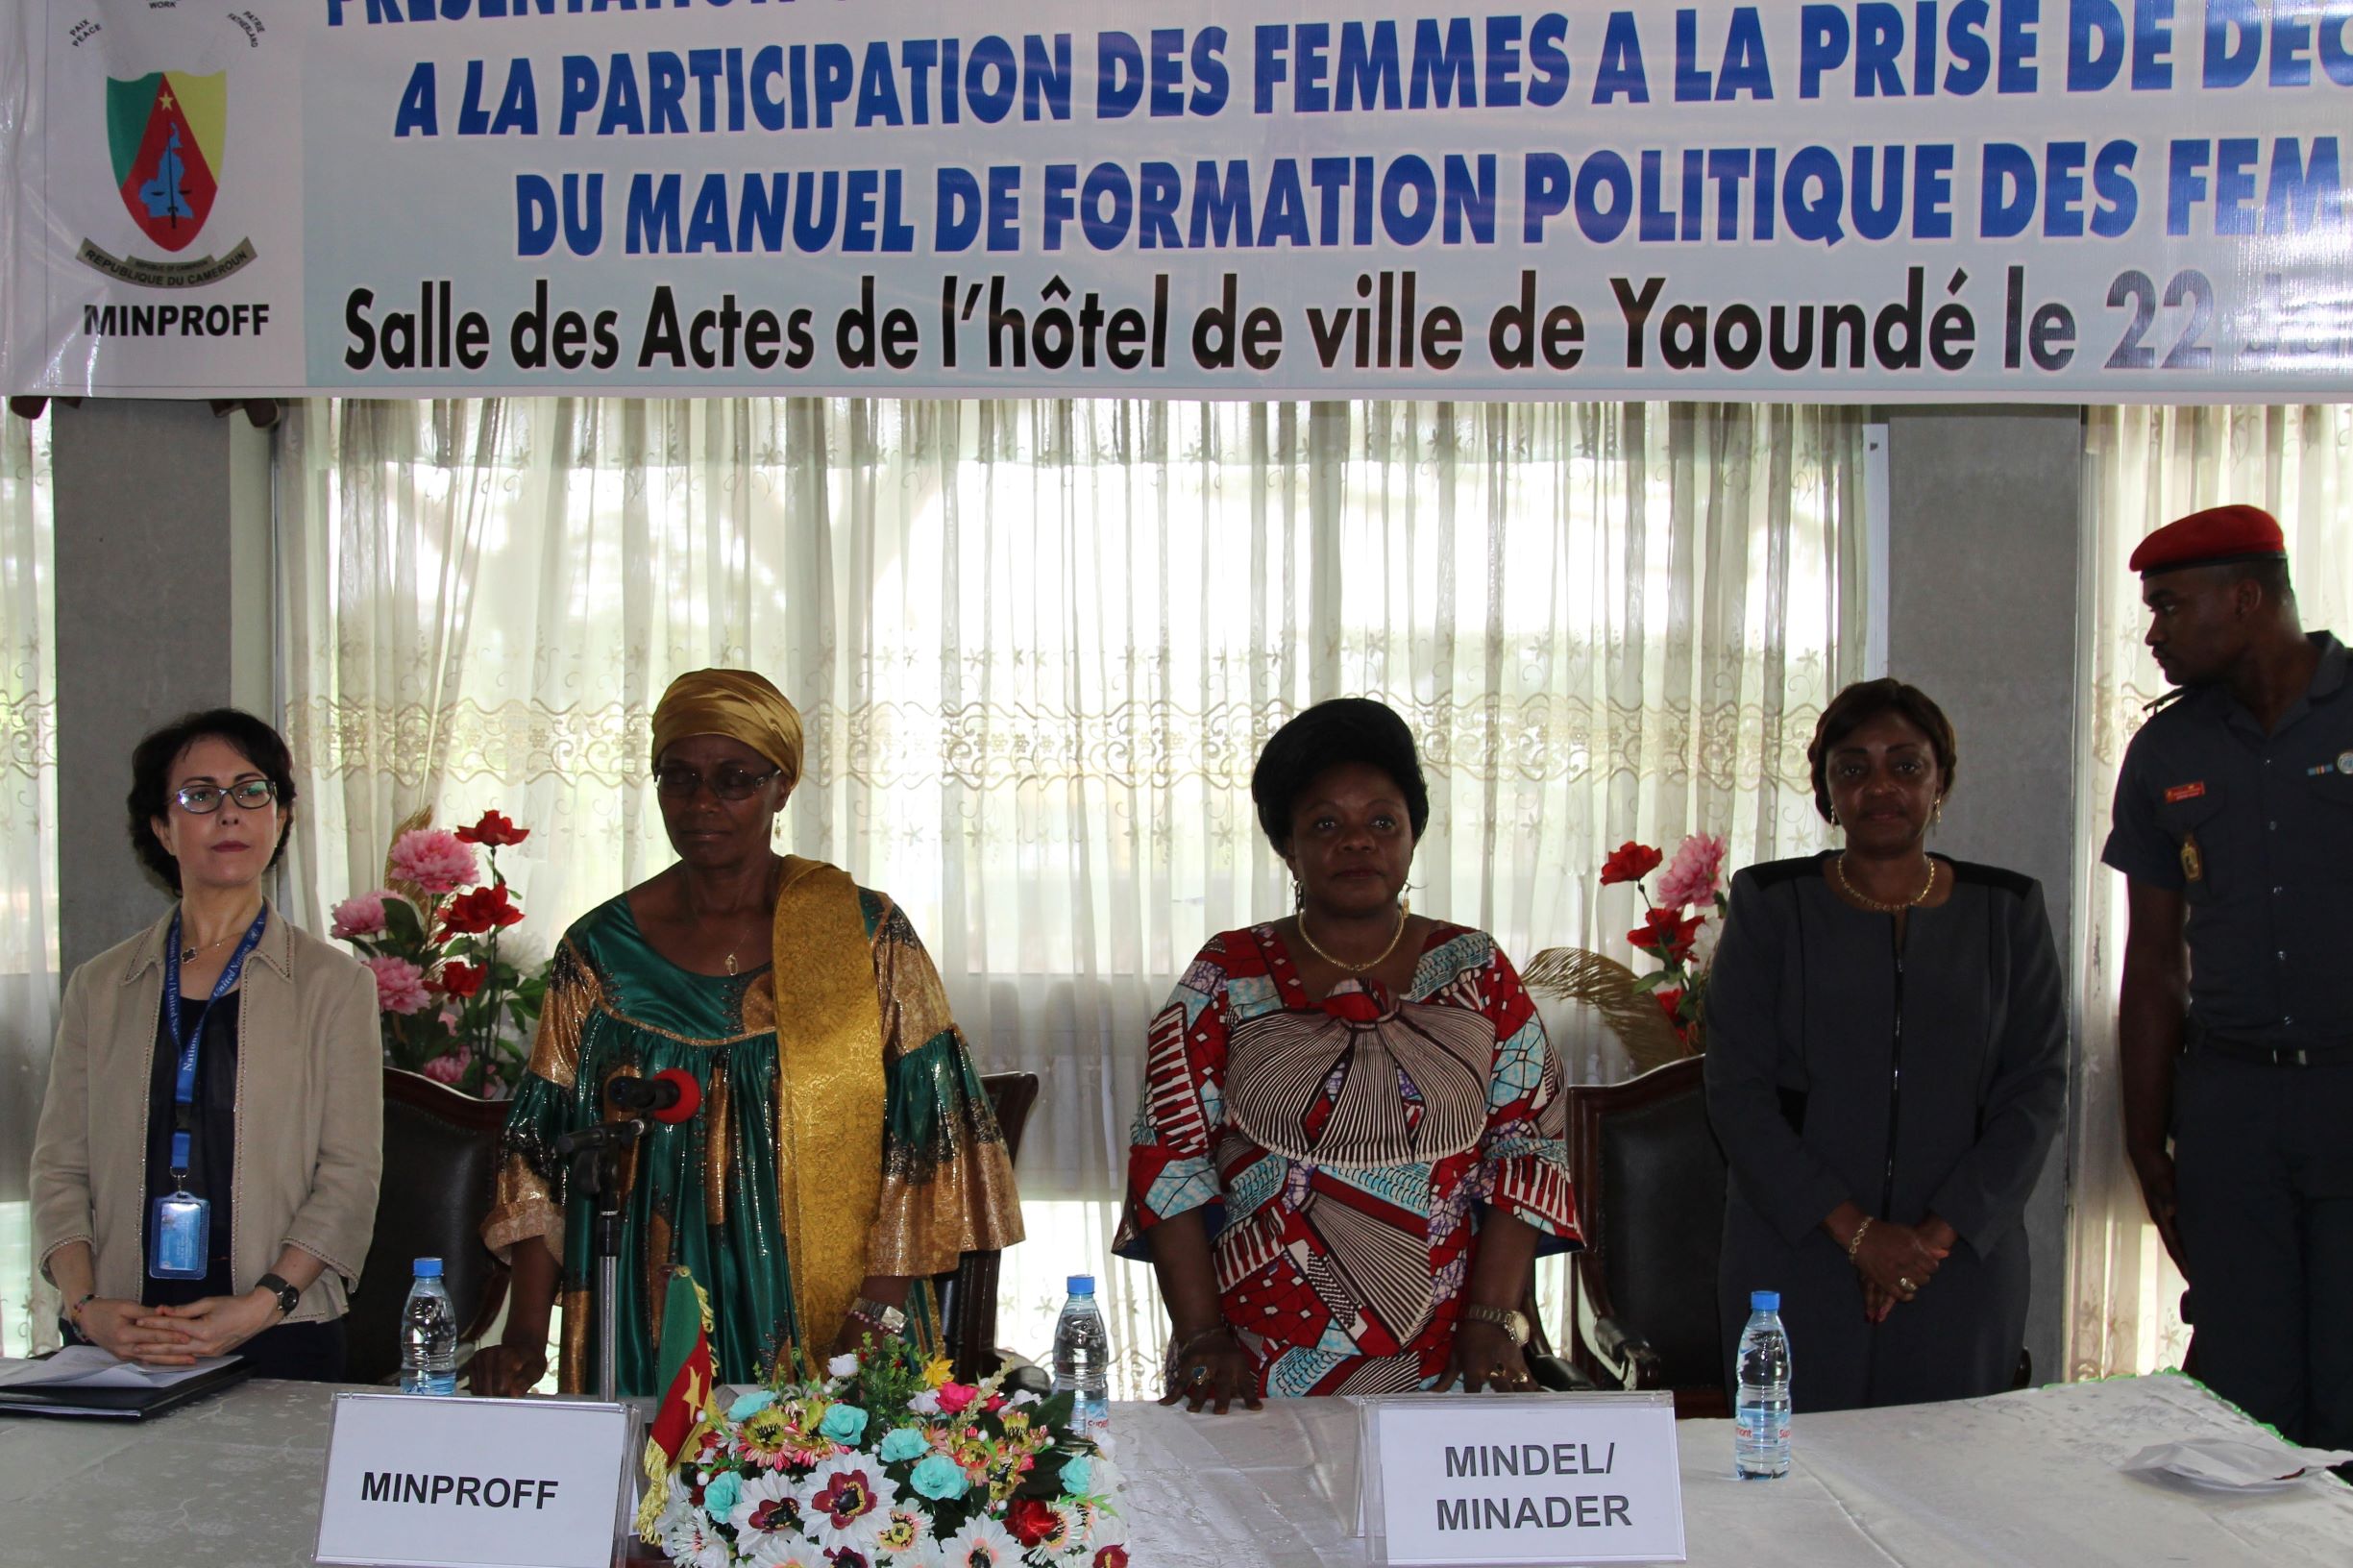 Officials presiding at the ceremony (from left to right) Hind Jalal, UN Women Deputy Representative; Mininster Abena Ondoa Marie-Therese, MINPROFF; Clementine Ananga Messina, Minister Delegate MINADER; and Angouing Francoise, Inspector General at MINPROFF photo credit: Teclaire Same, UN Women